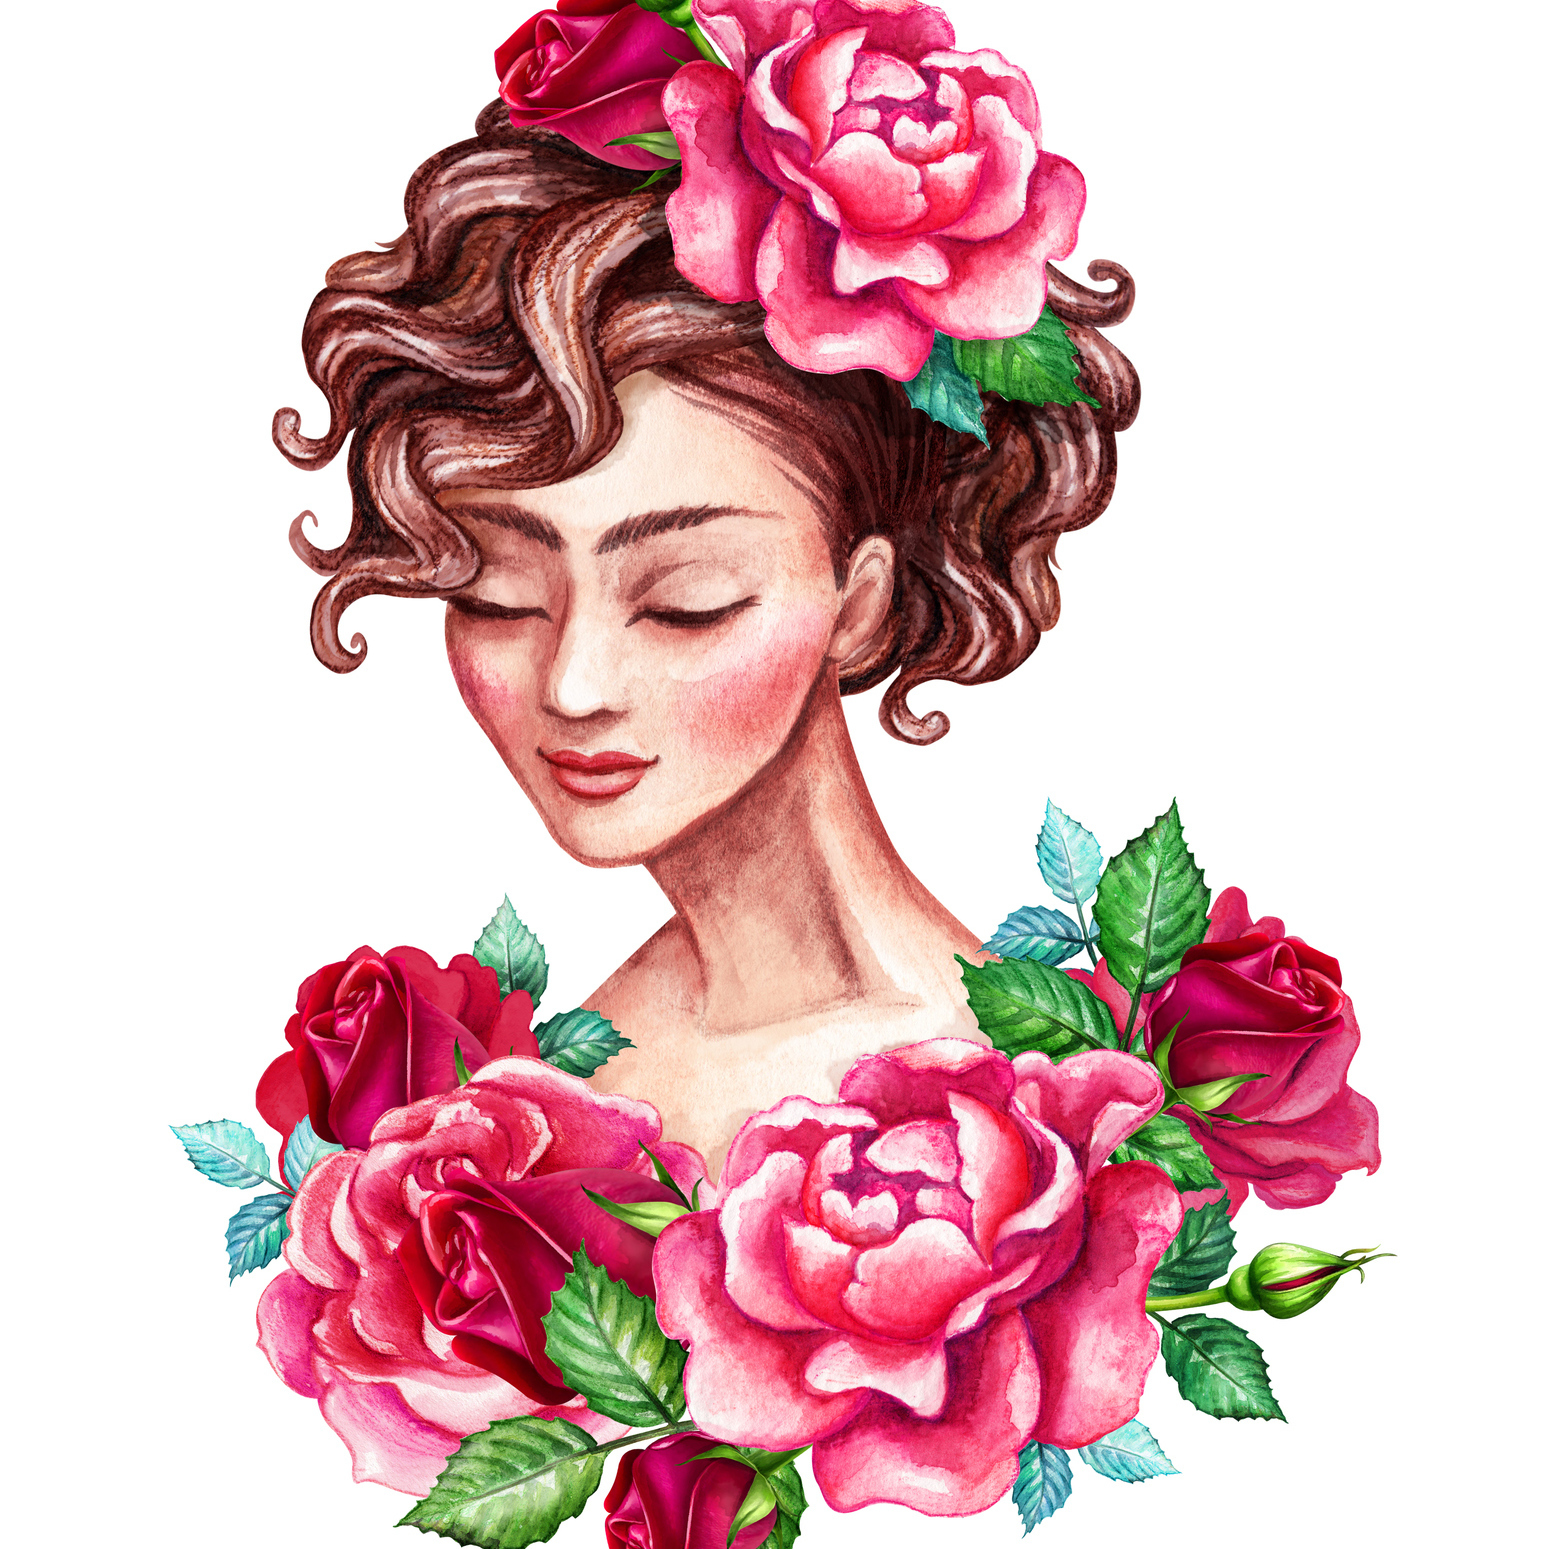 painting of a woman surrounded by red and pink roses